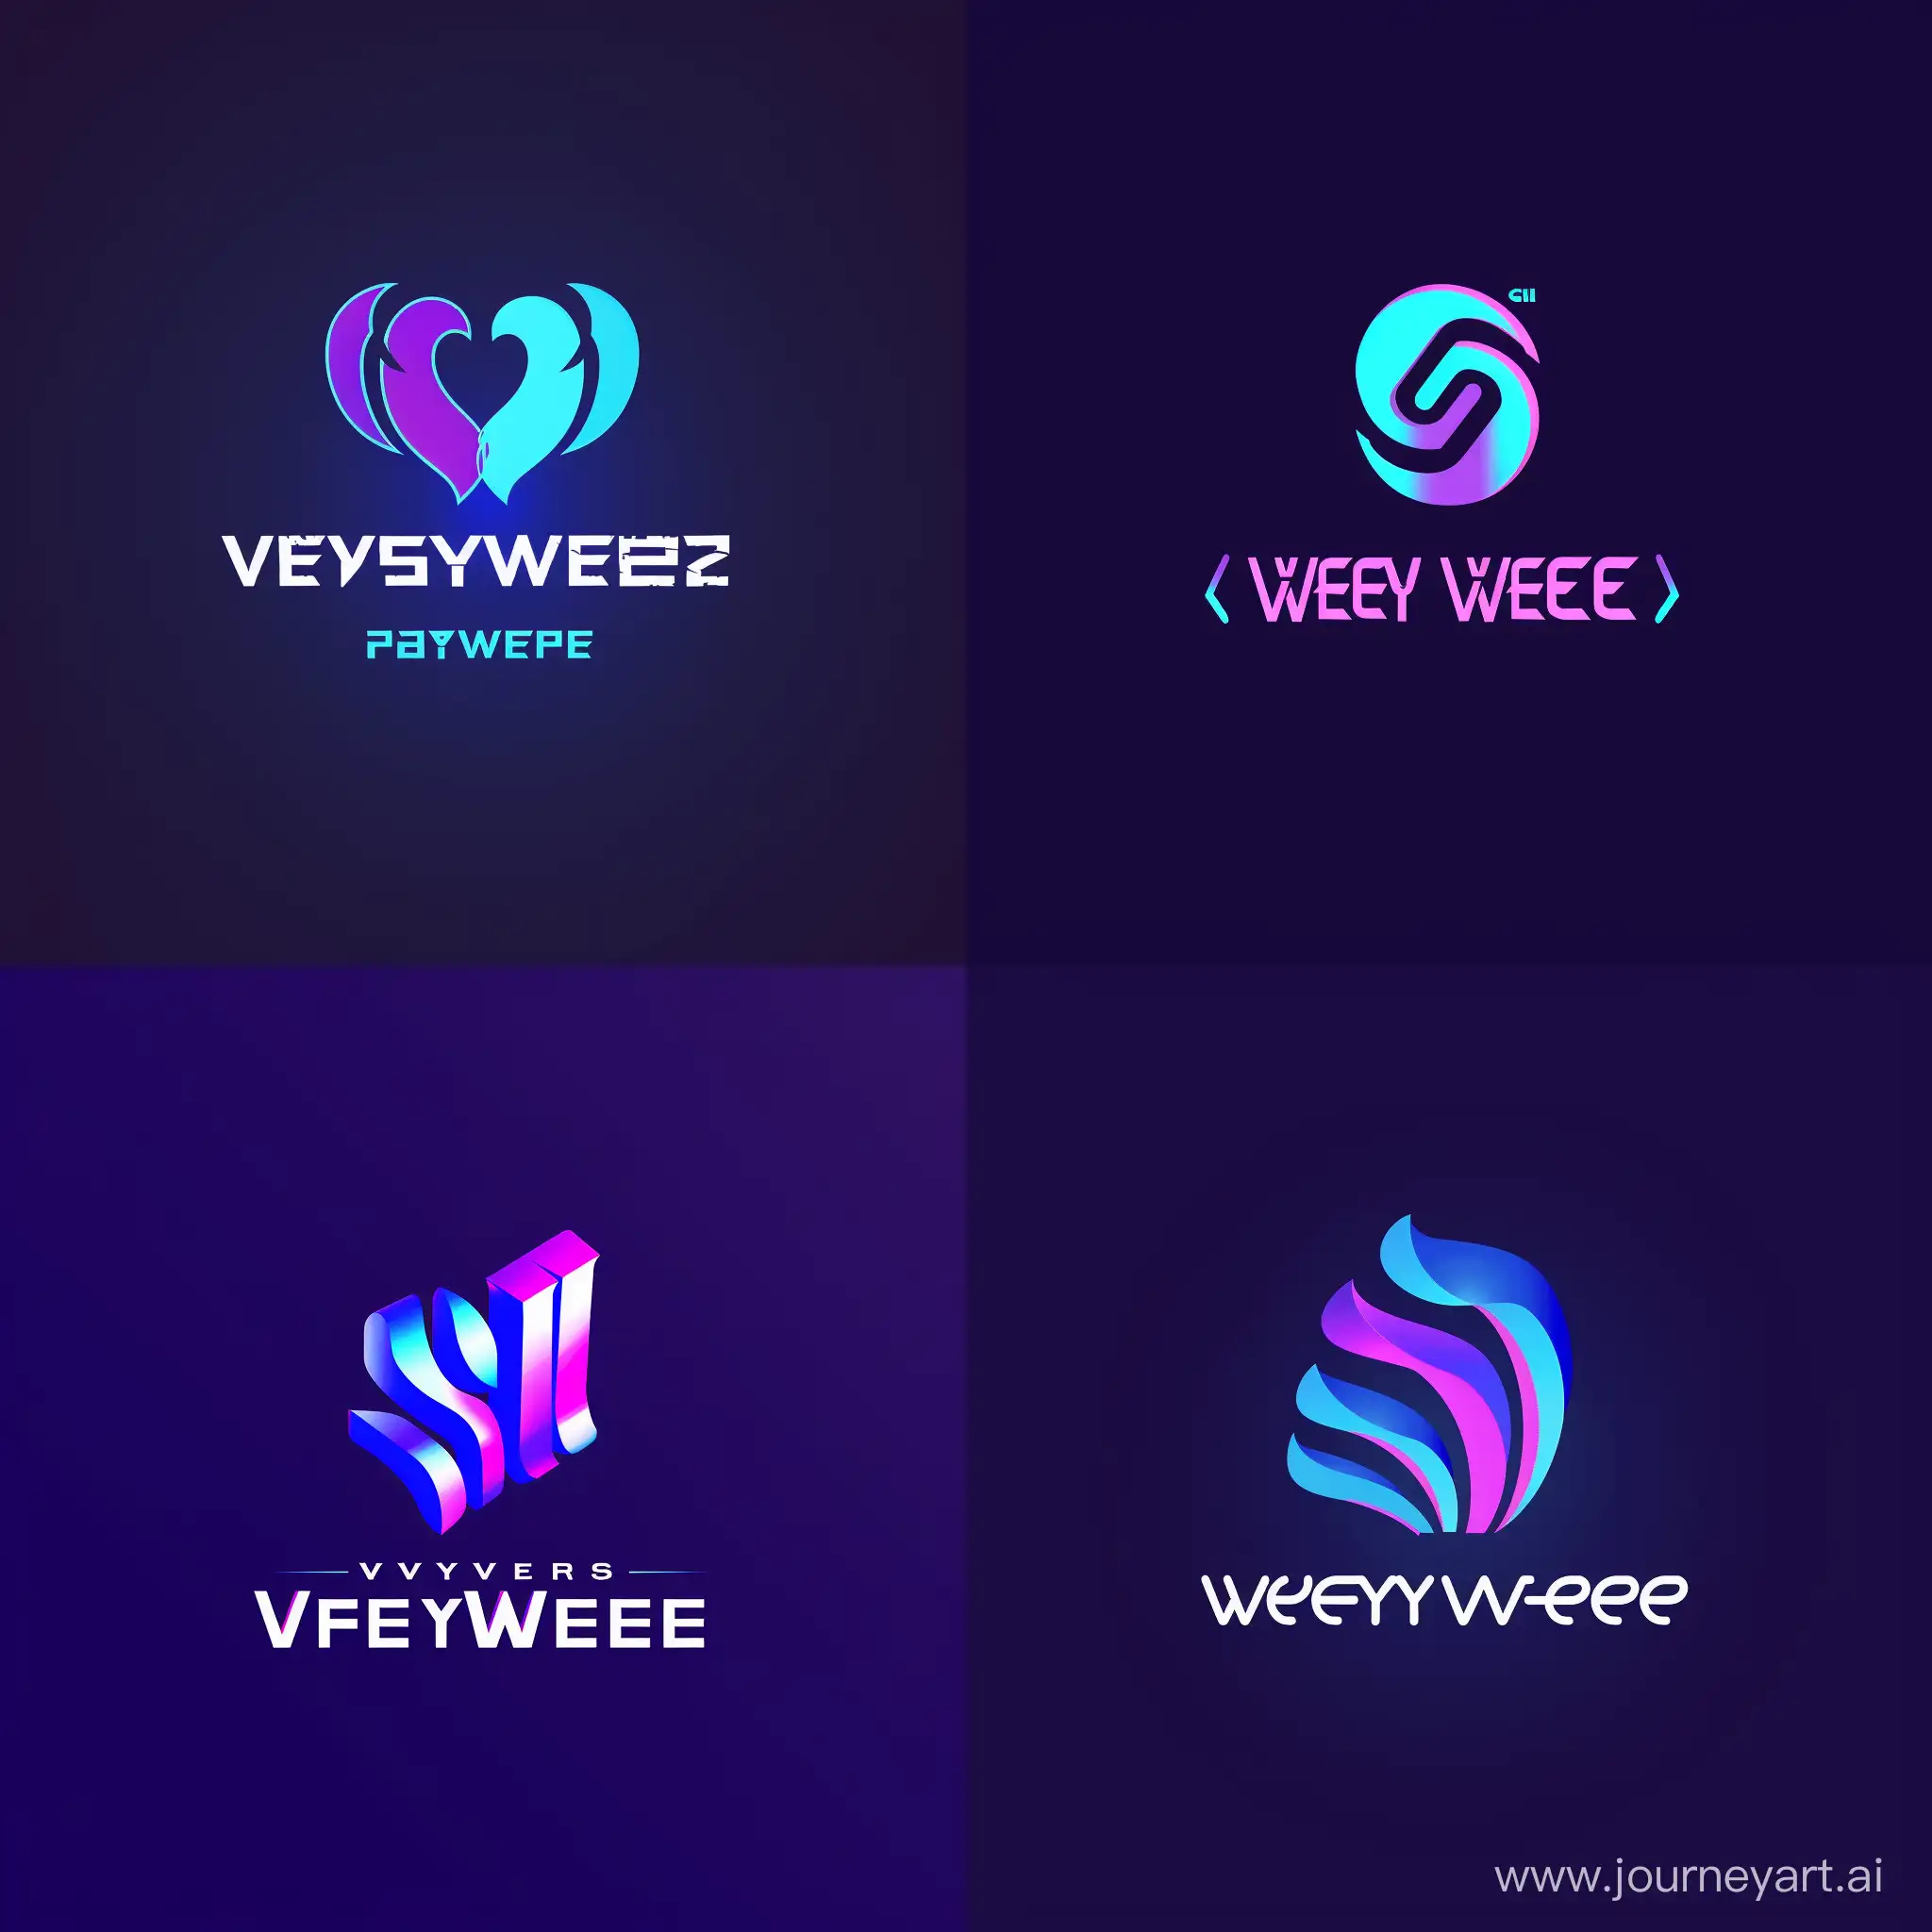 Video-Verse-Games-Company-Logo-in-Purple-and-Blue-Palette